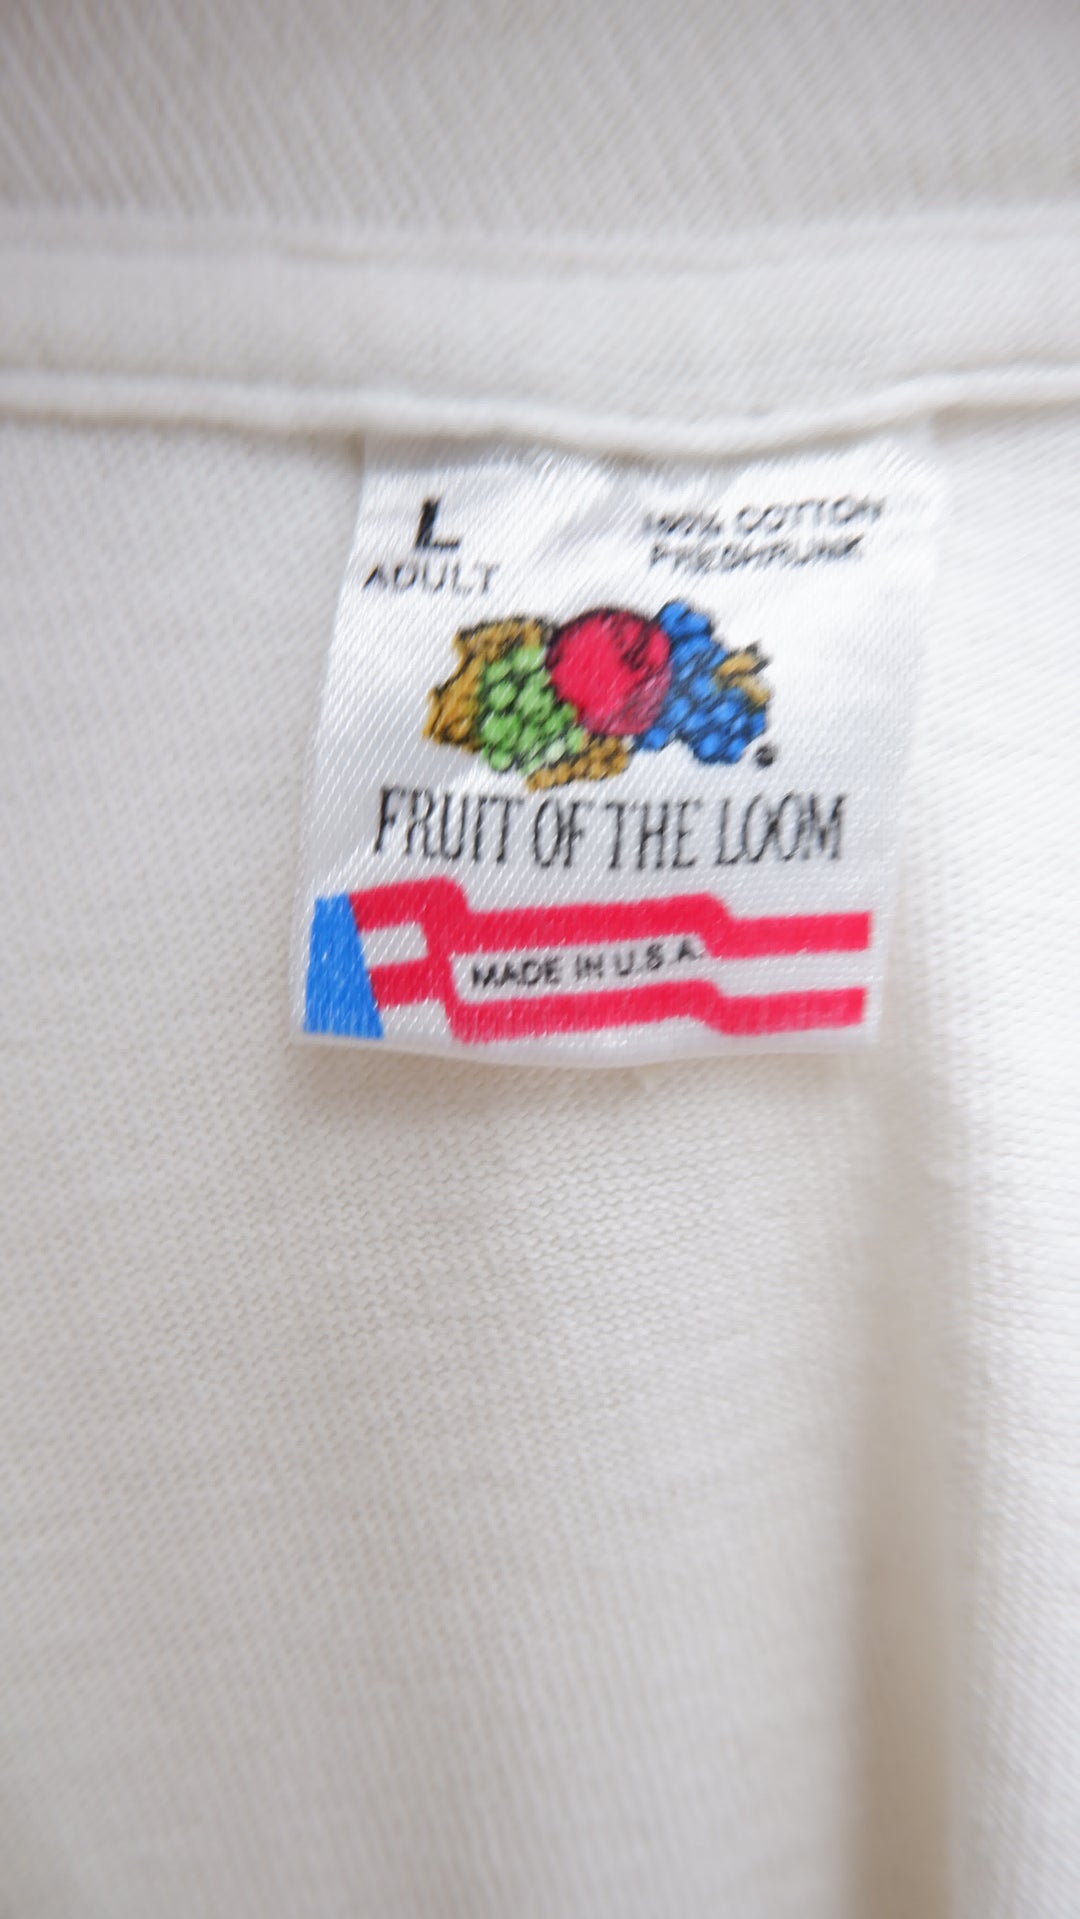 Vintage Fruit Of The Loom Fisher Design Mario '93 Kmart Racing Single Stitch T-Shirt Made in USA